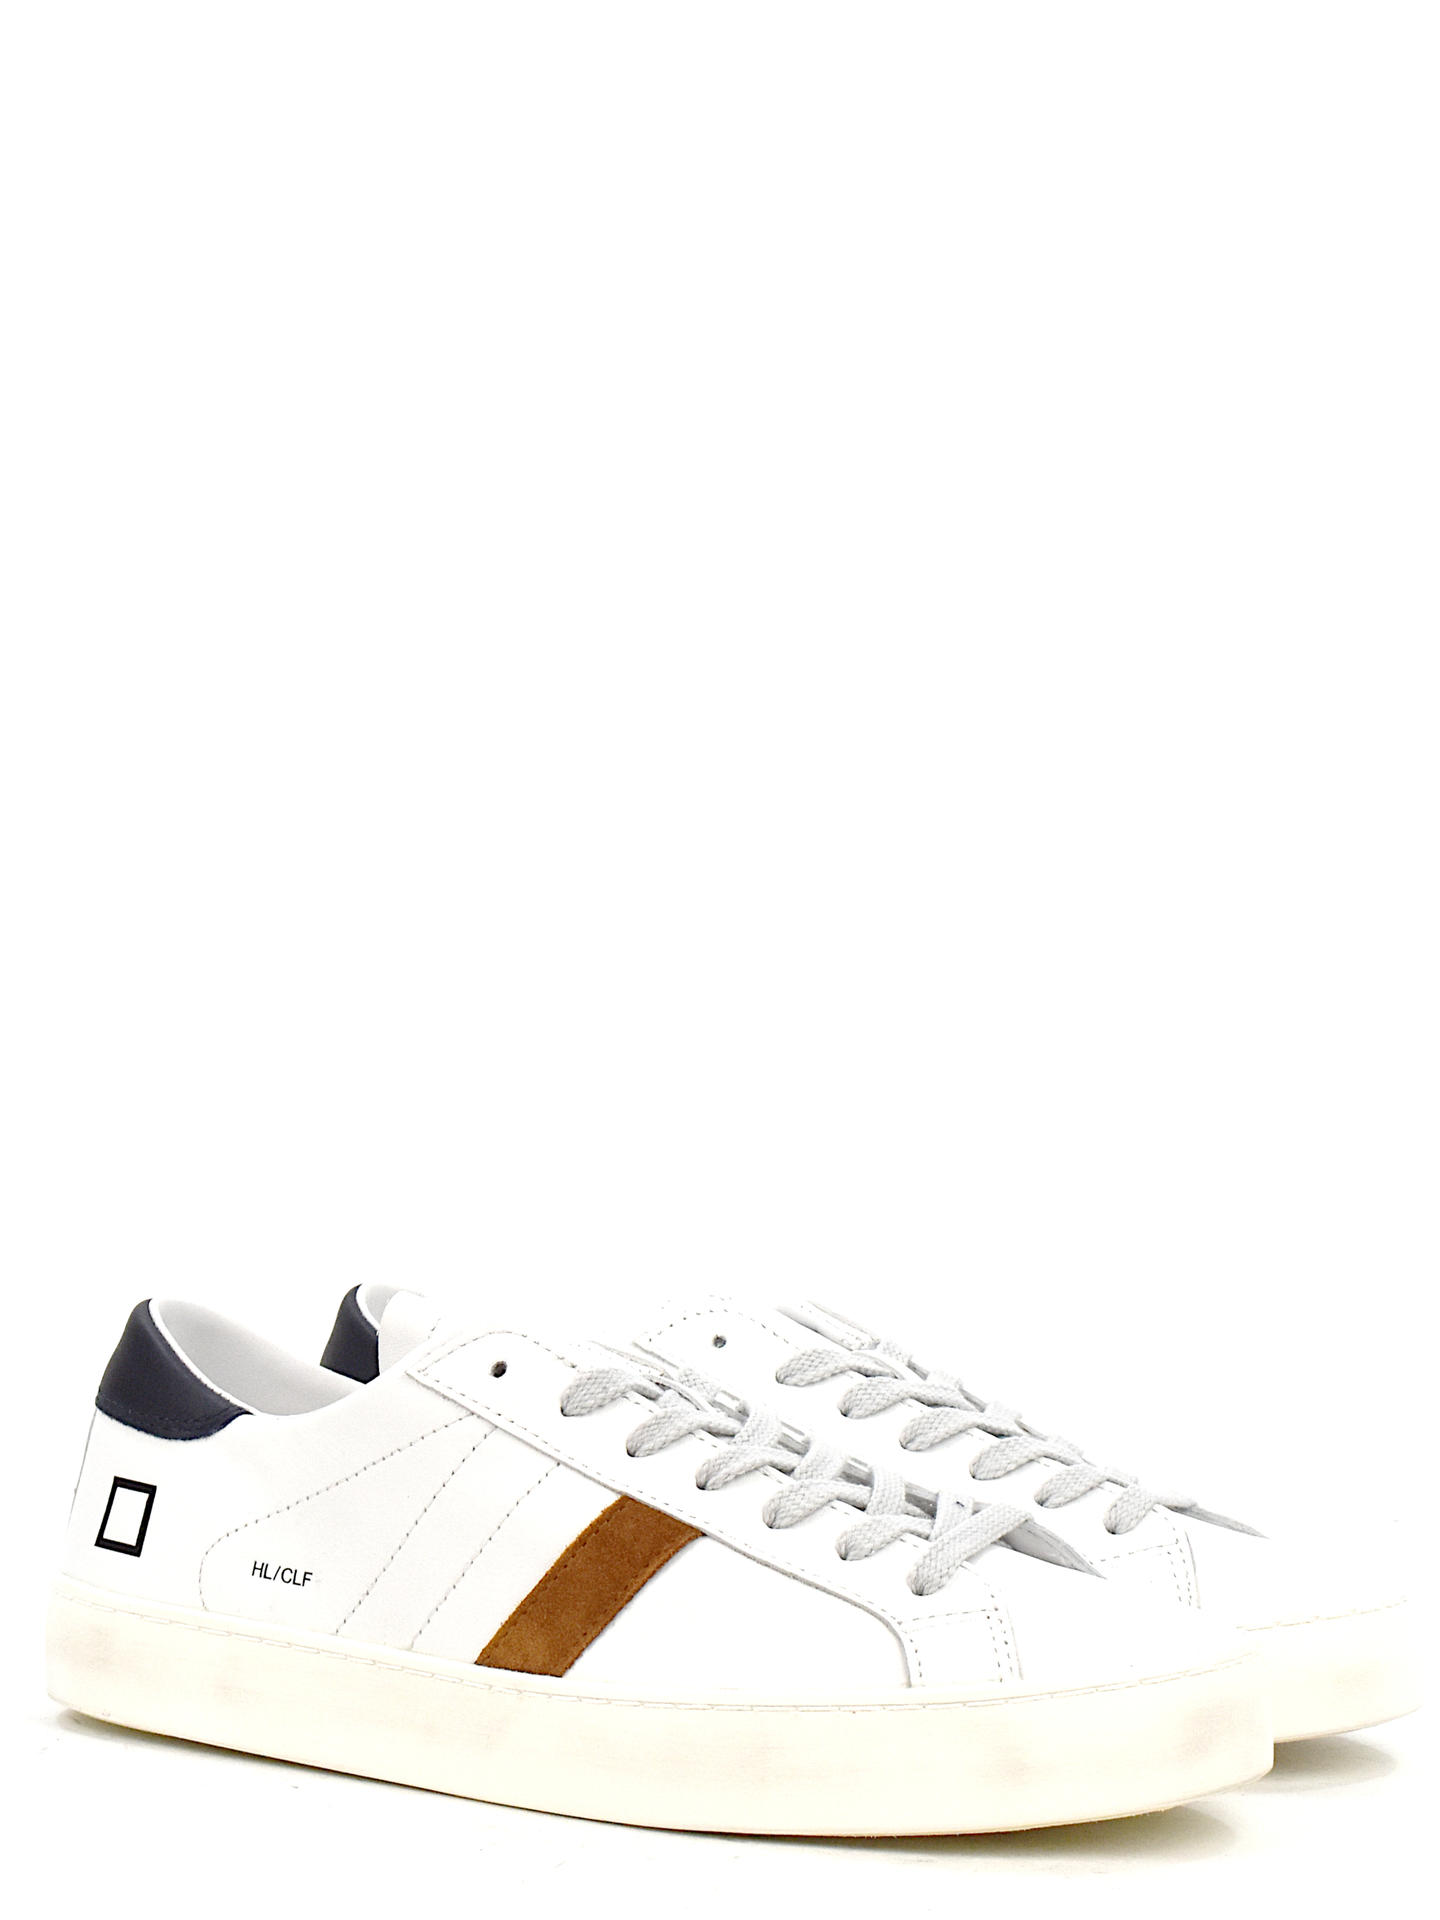 SNEAKERS D.A.T.E HLCAW BIANCO/BLU